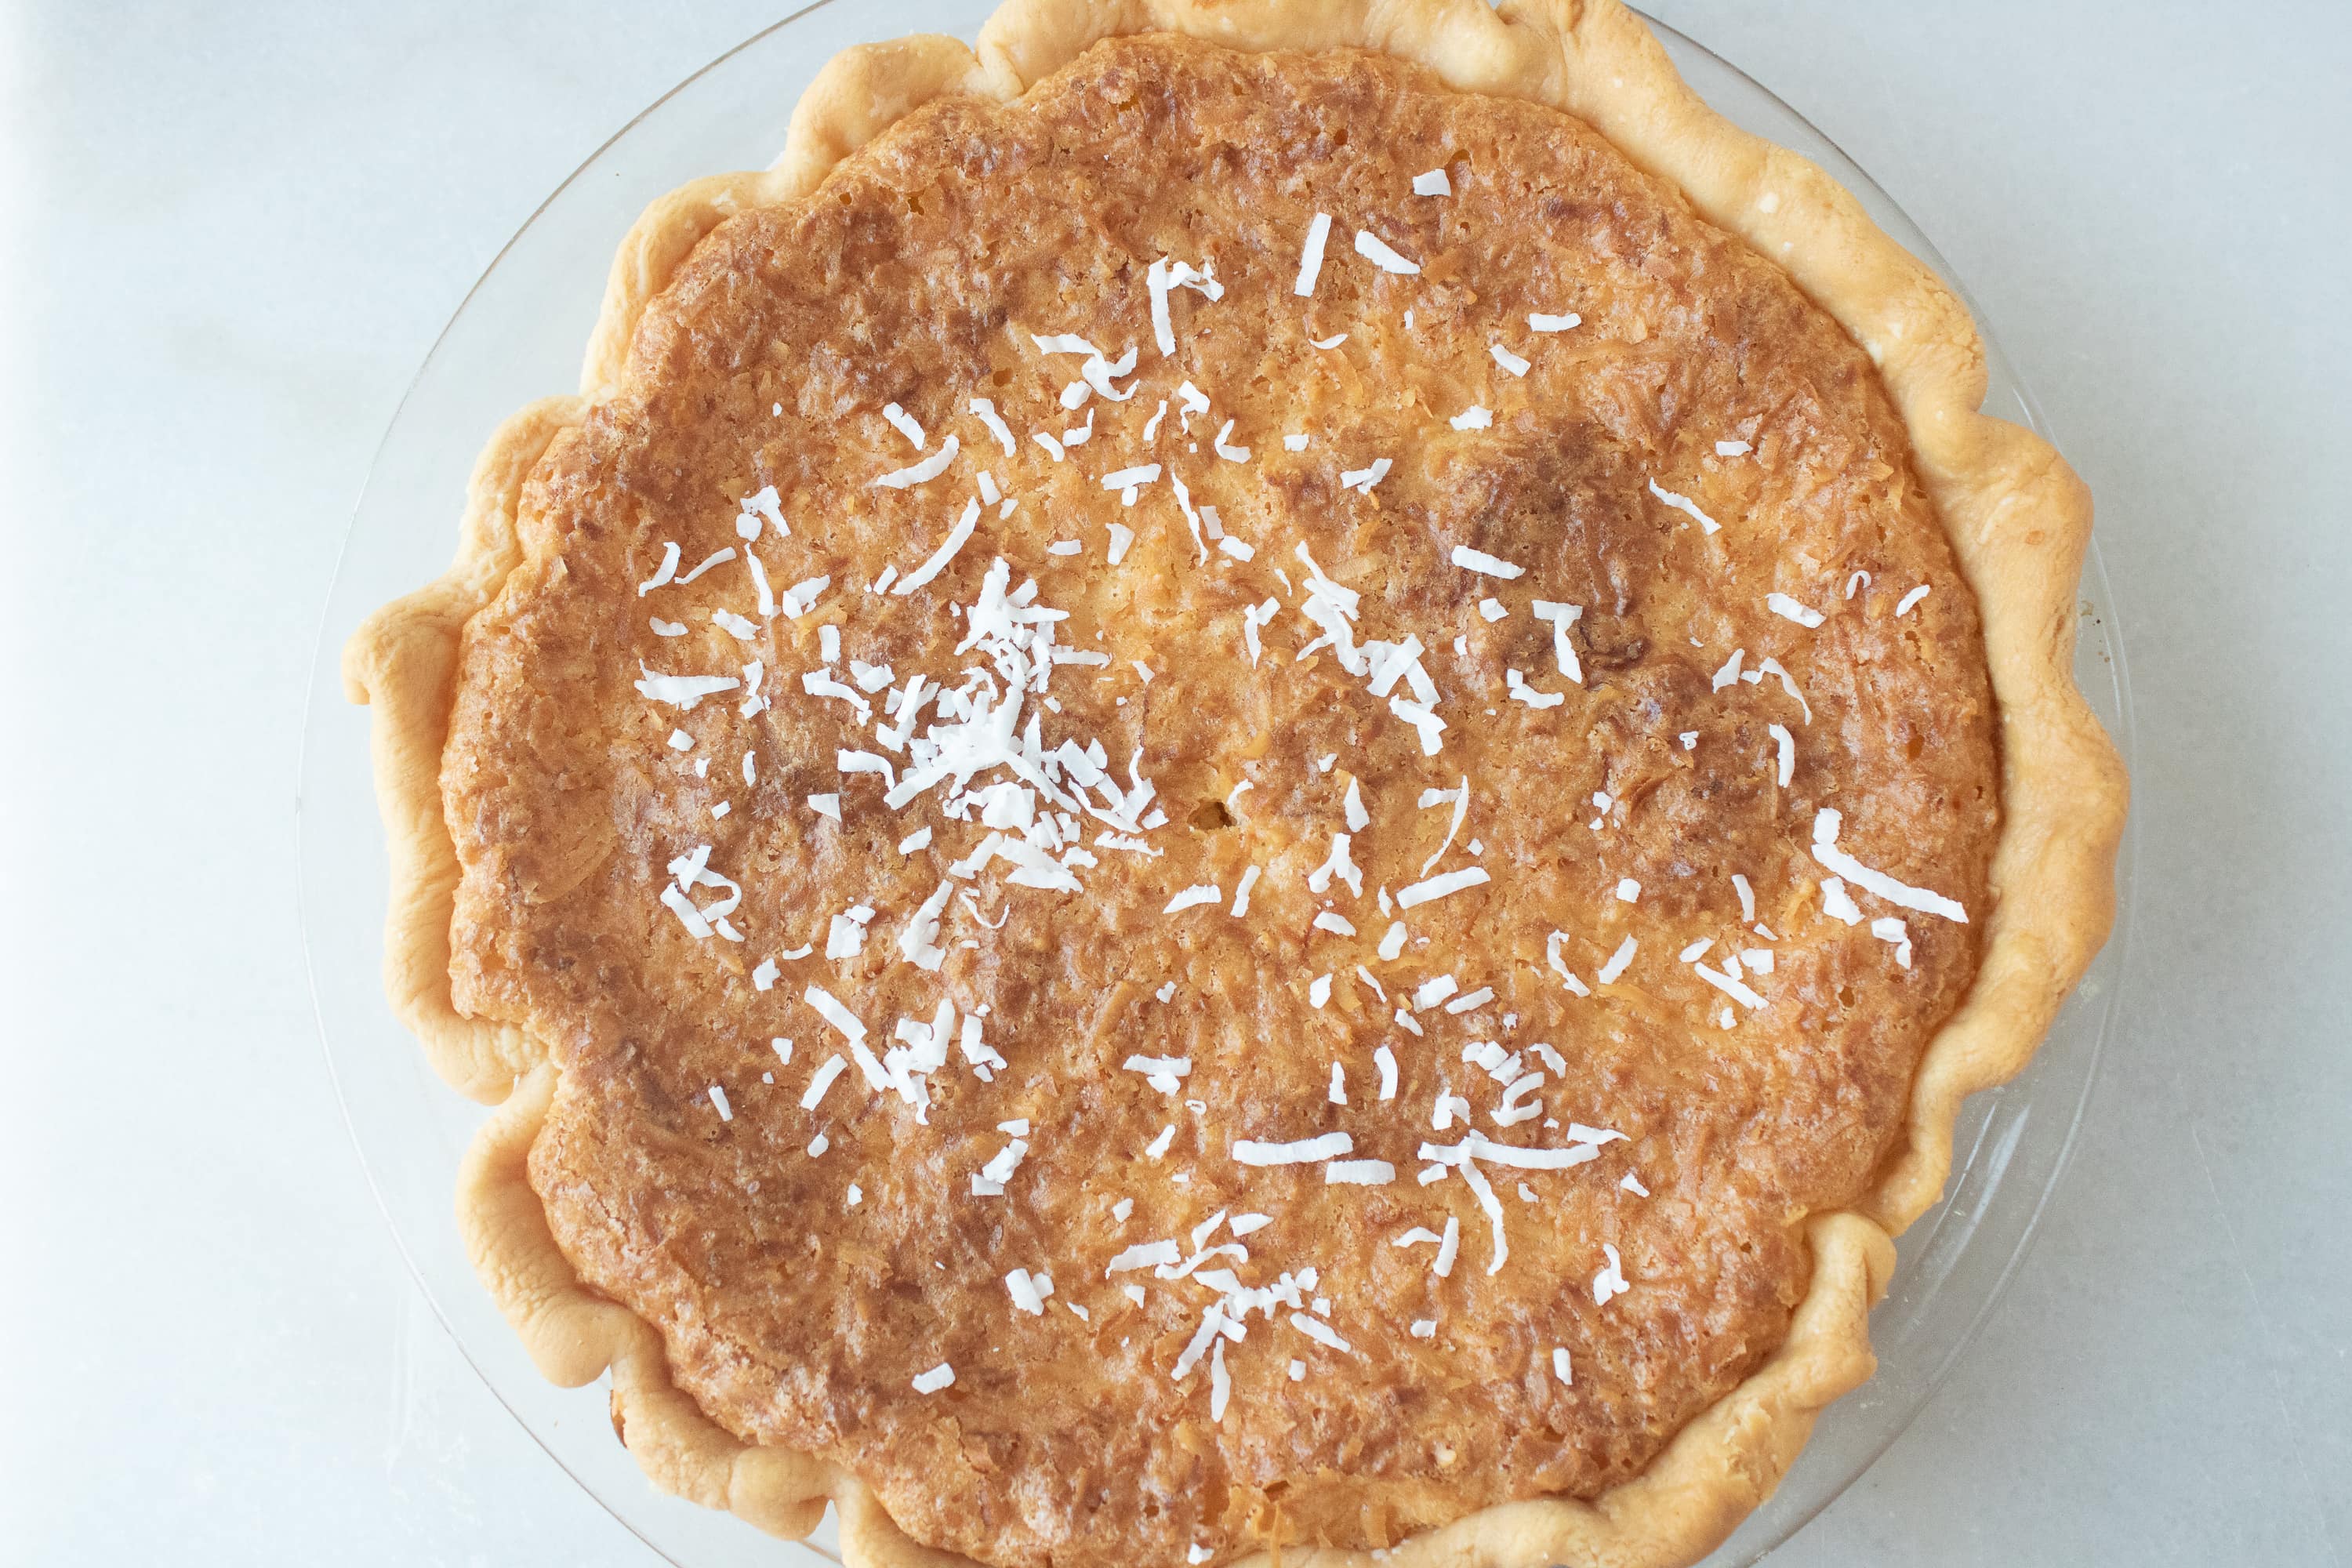 This coconut cream pie recipe features a yummy and creamy coconut filling, can be used with your favorite pie crust, and topped with coconut shavings. Perfect for Thanksgiving and anytime.